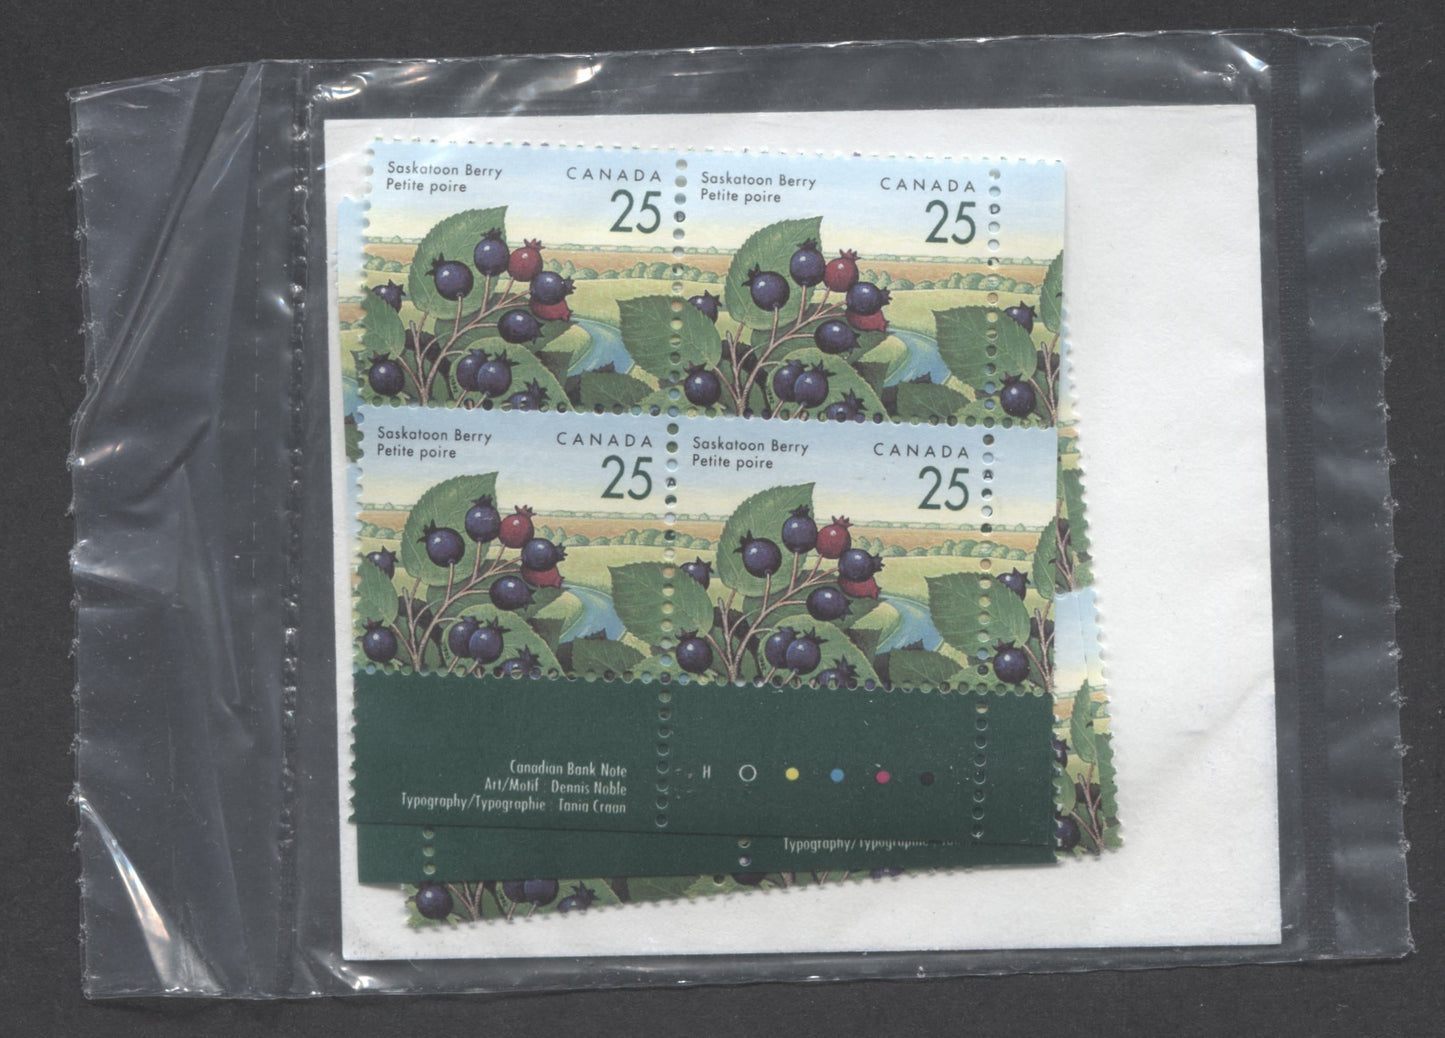 Lot 28 Canada #1355i 25c Multicoloured 1992 - 1998 Edible Berries Definitive Issue, Canada Post Sealed Pack of Inscription Blocks, CBN Printing On DF Harrison Paper, With HB Type 6A Insert Card, VFNH, Unitrade Cat. $25